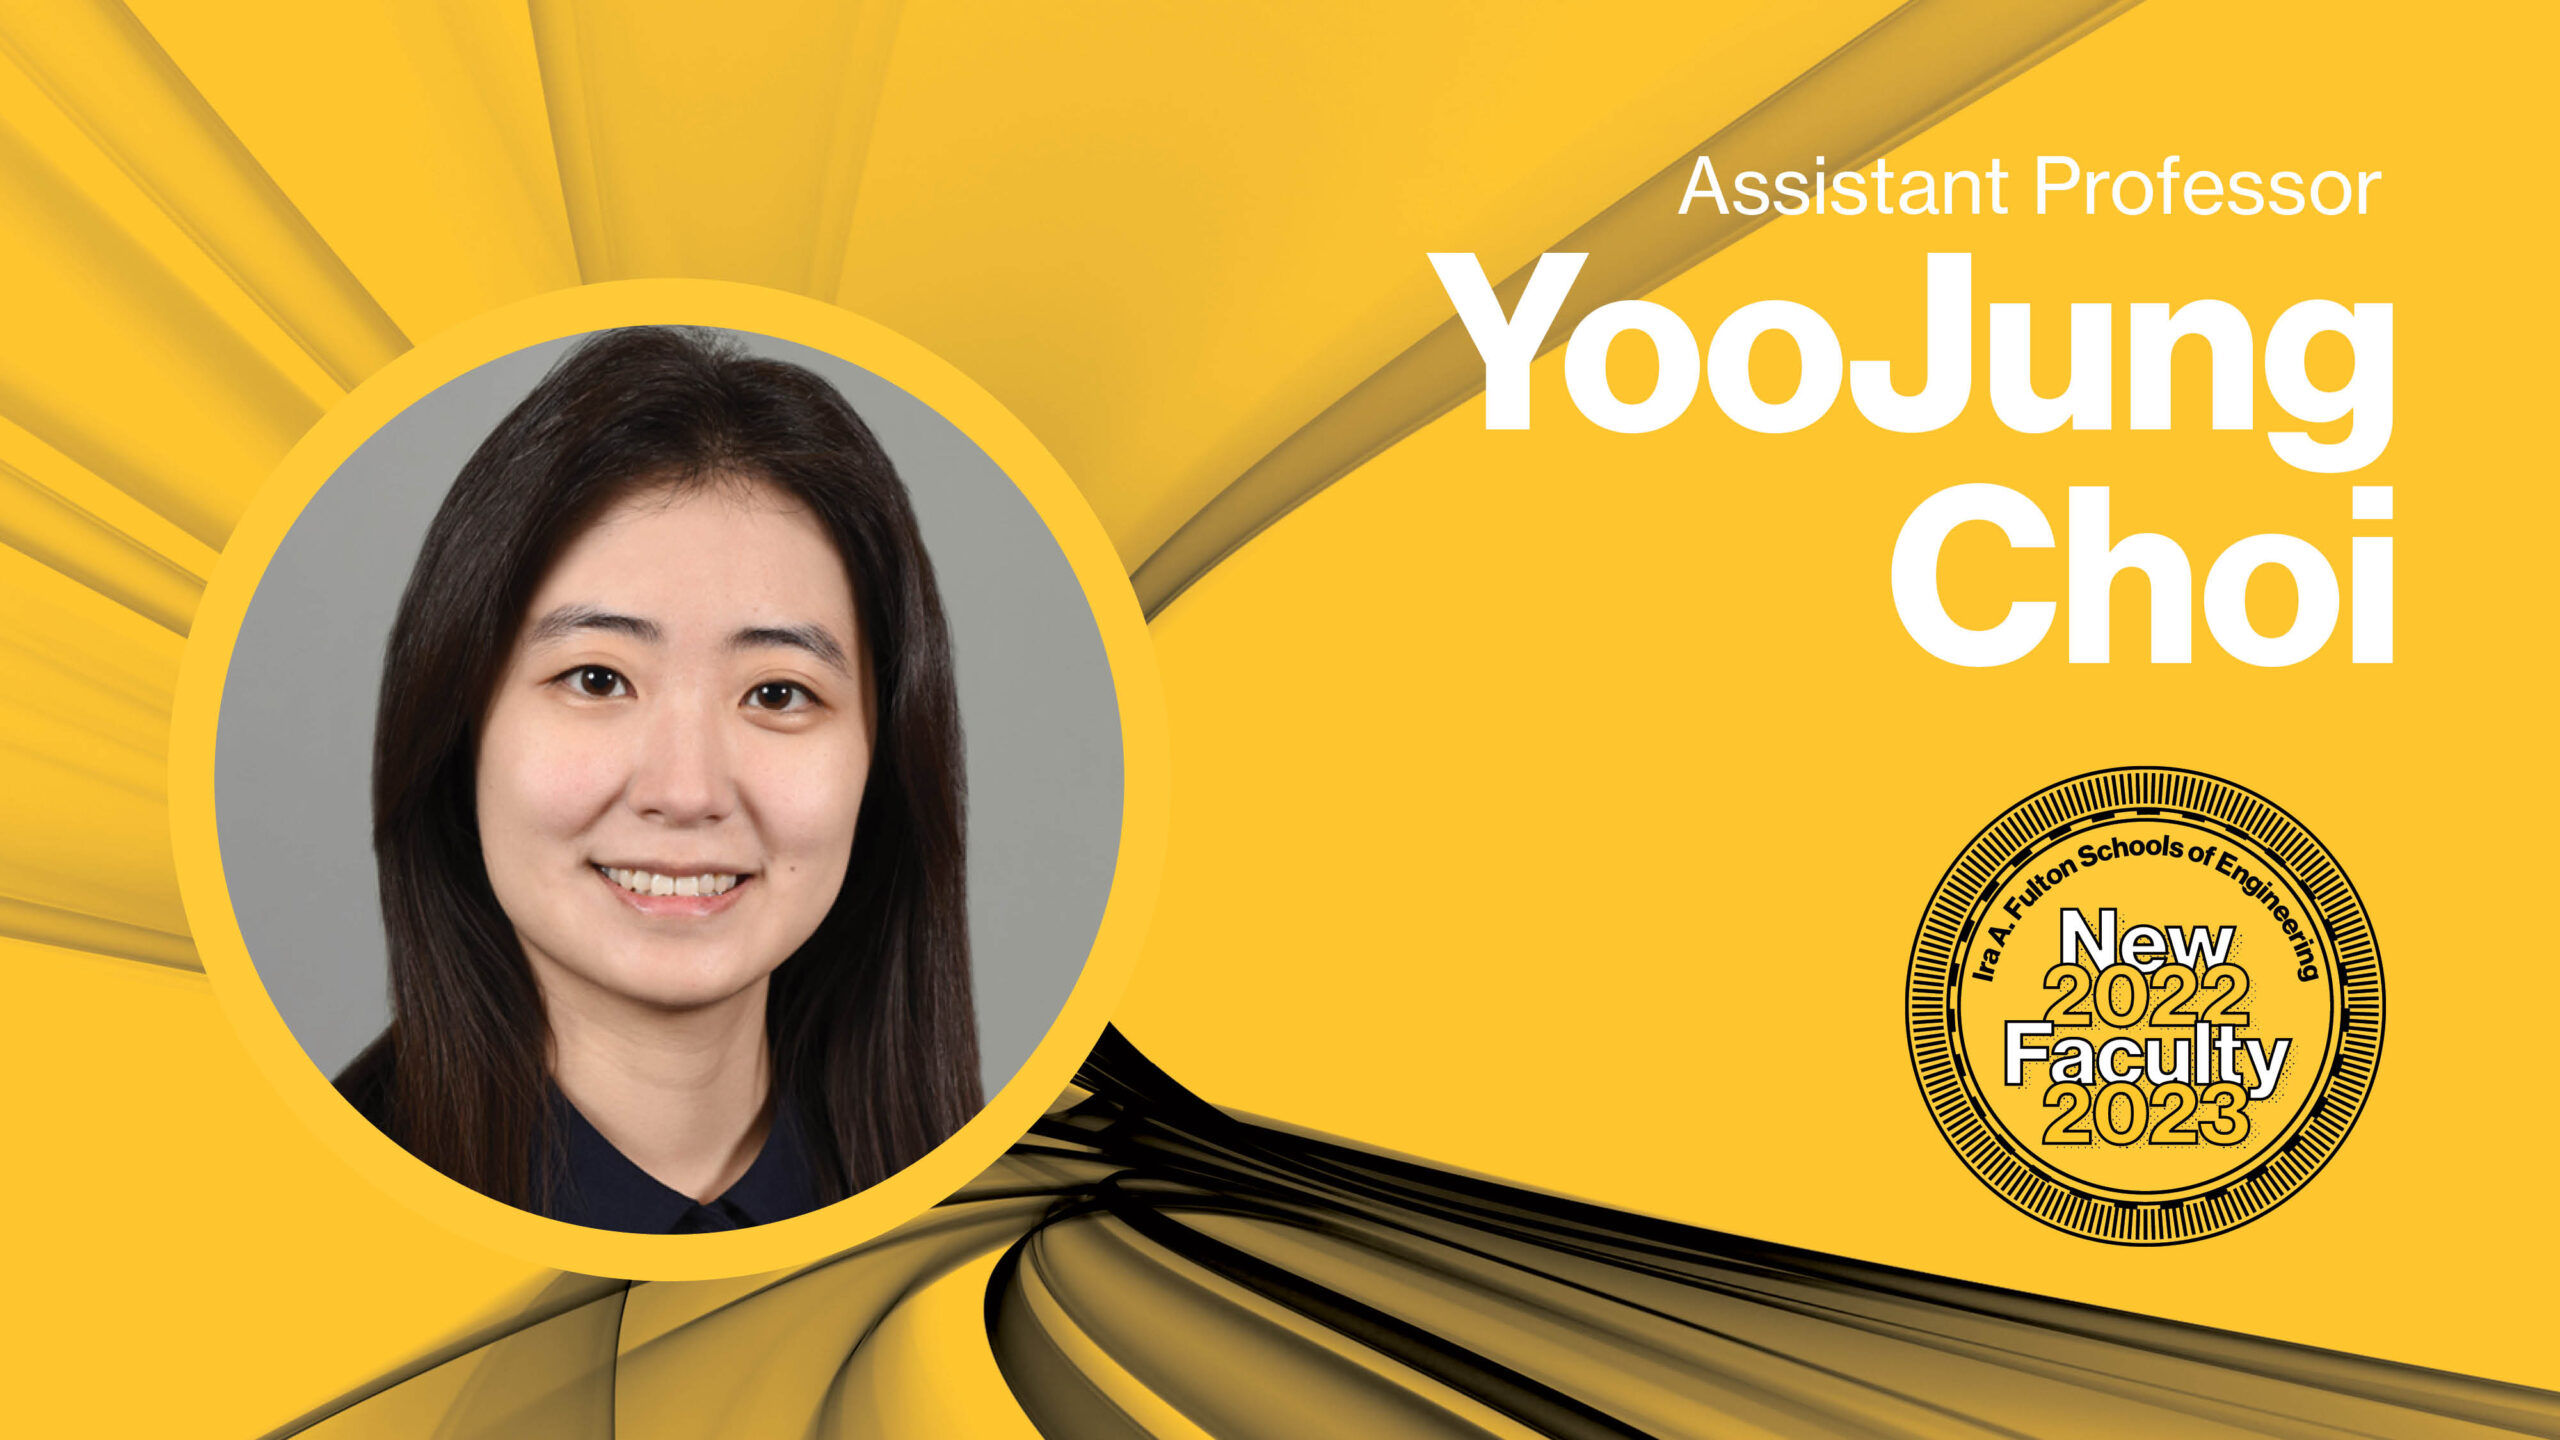 Assistant Professor YooJung Choi Ira A. Fulton Schools of Engineering New Faculty 2022-2023 with a headshot